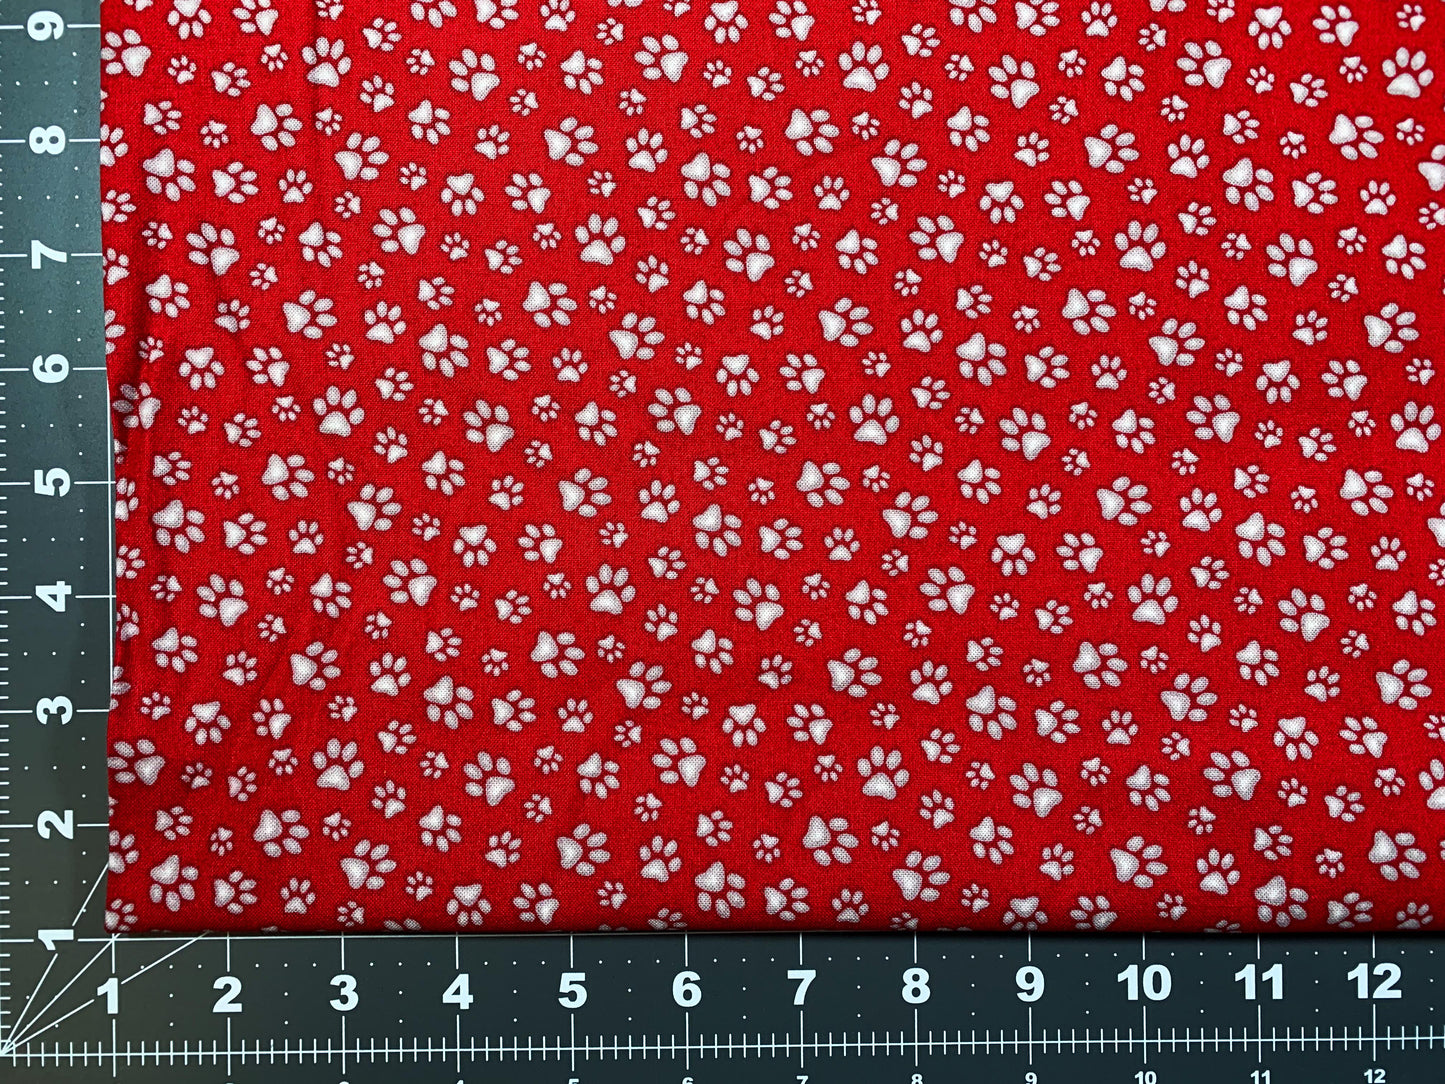 Red Paw fabric 181 Adorable Pet Paws